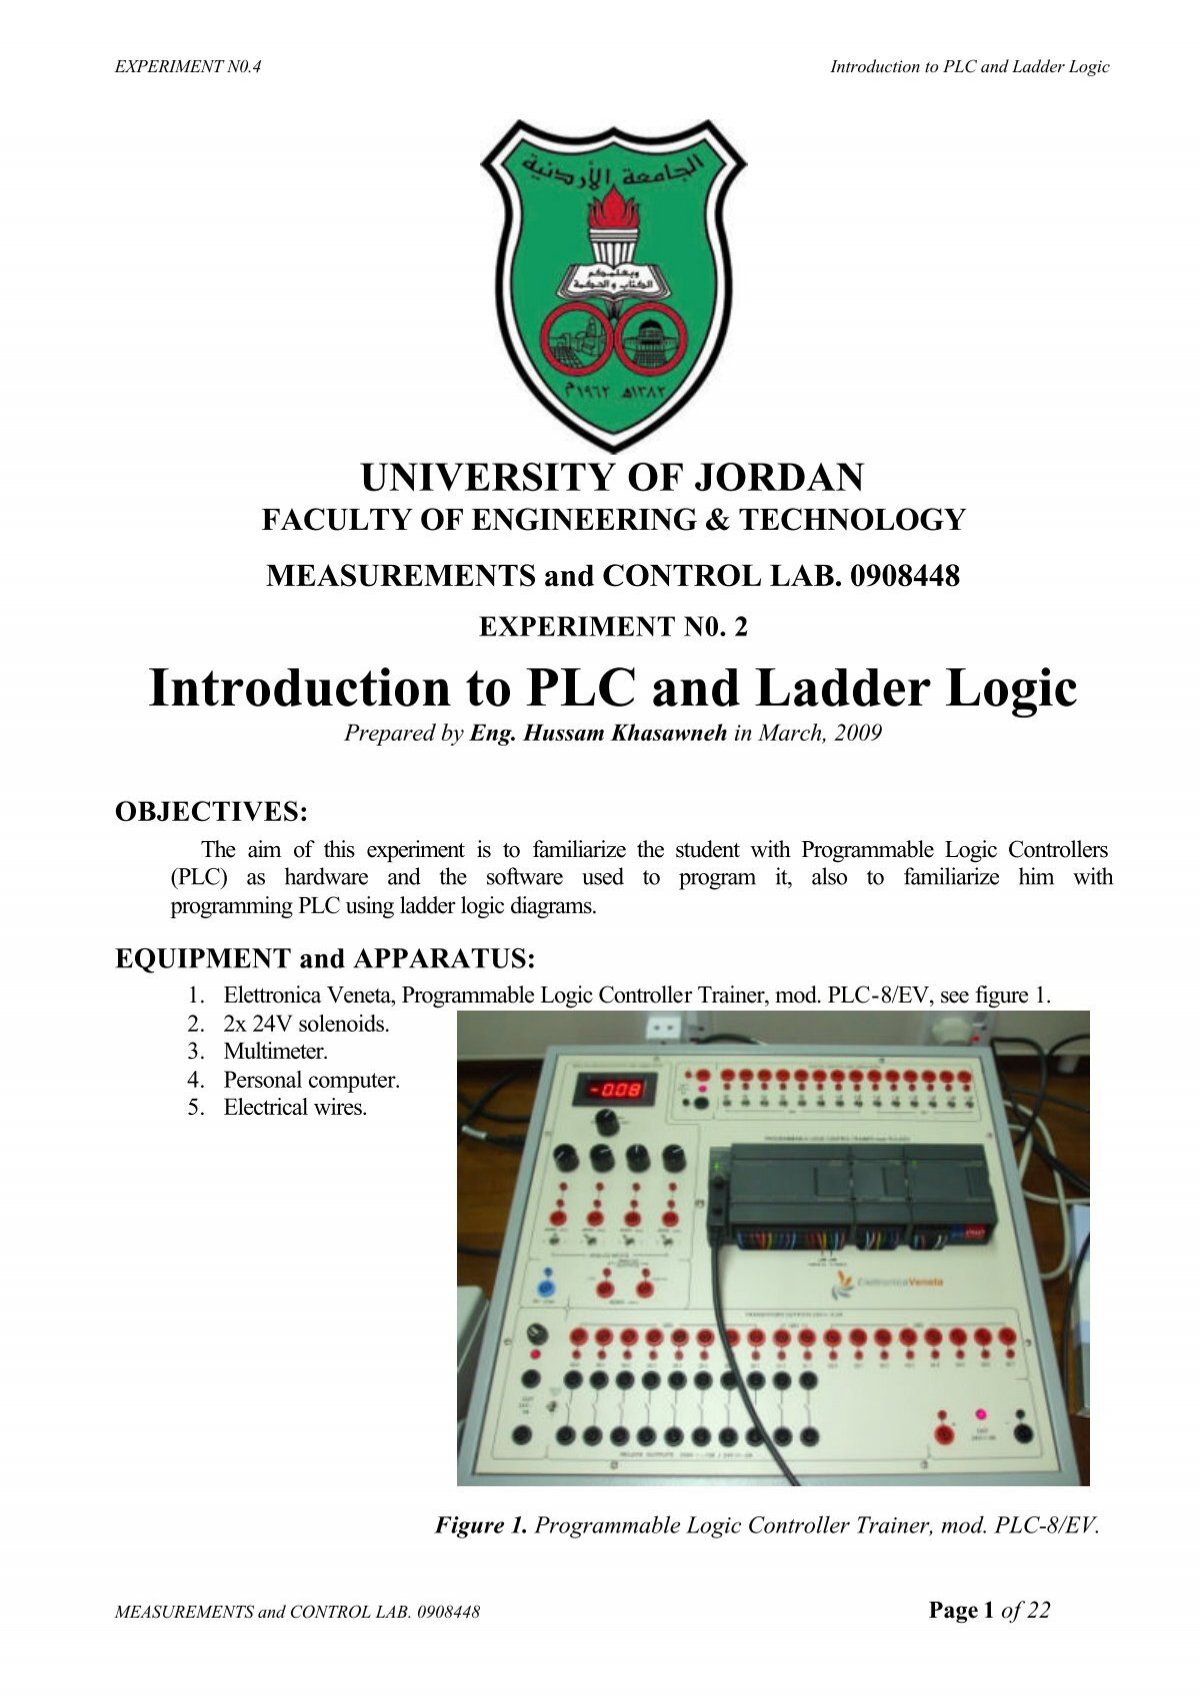 Introduction to PLC and Ladder Logic - FET